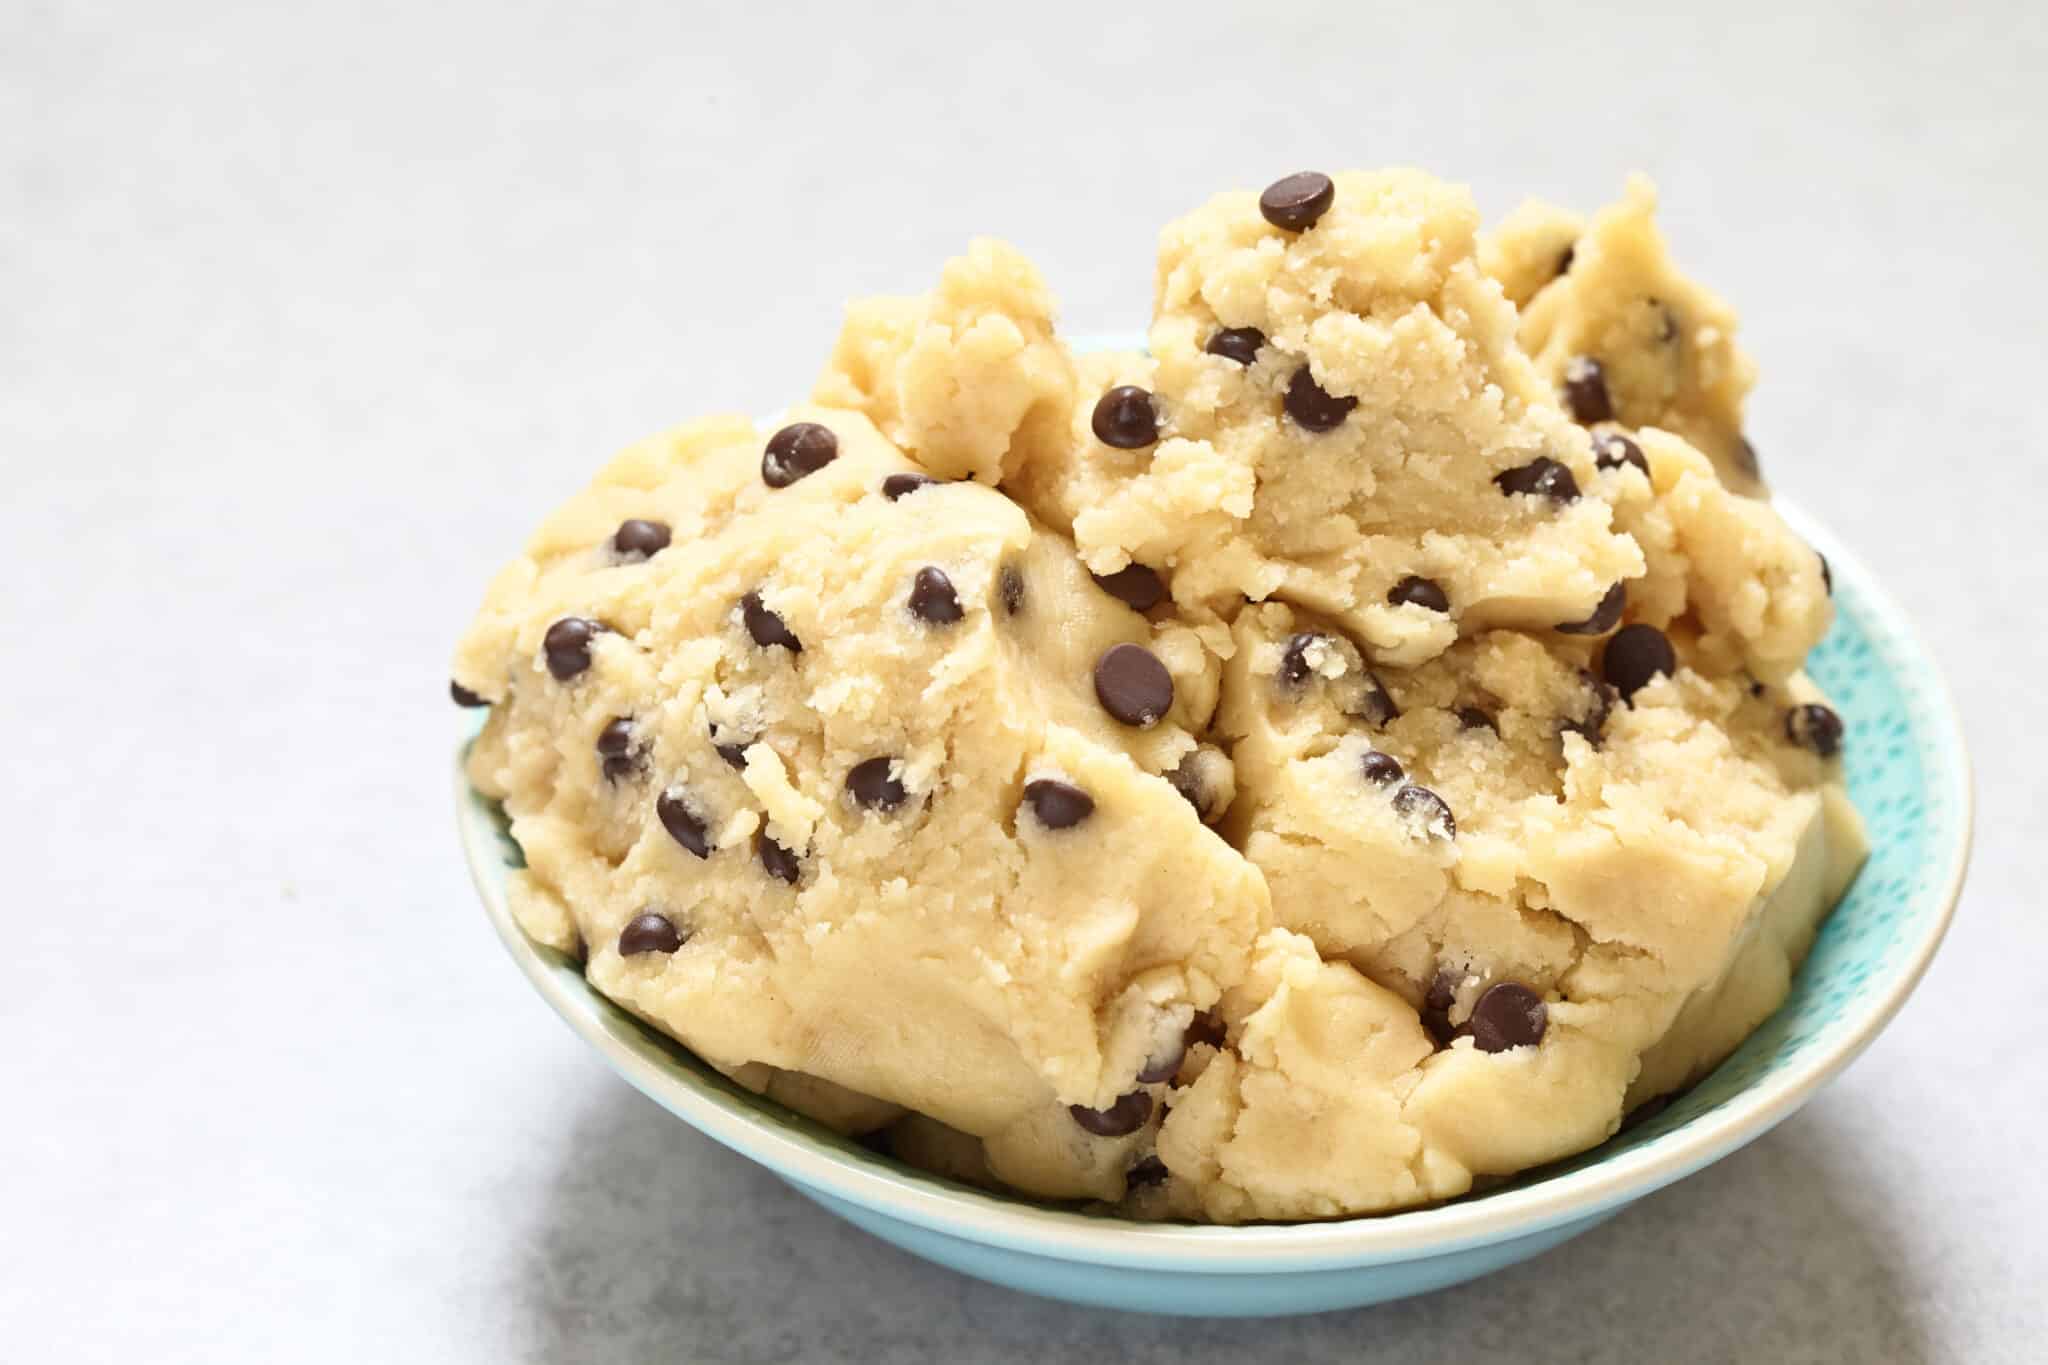 Can You Microwave Cookie Dough?